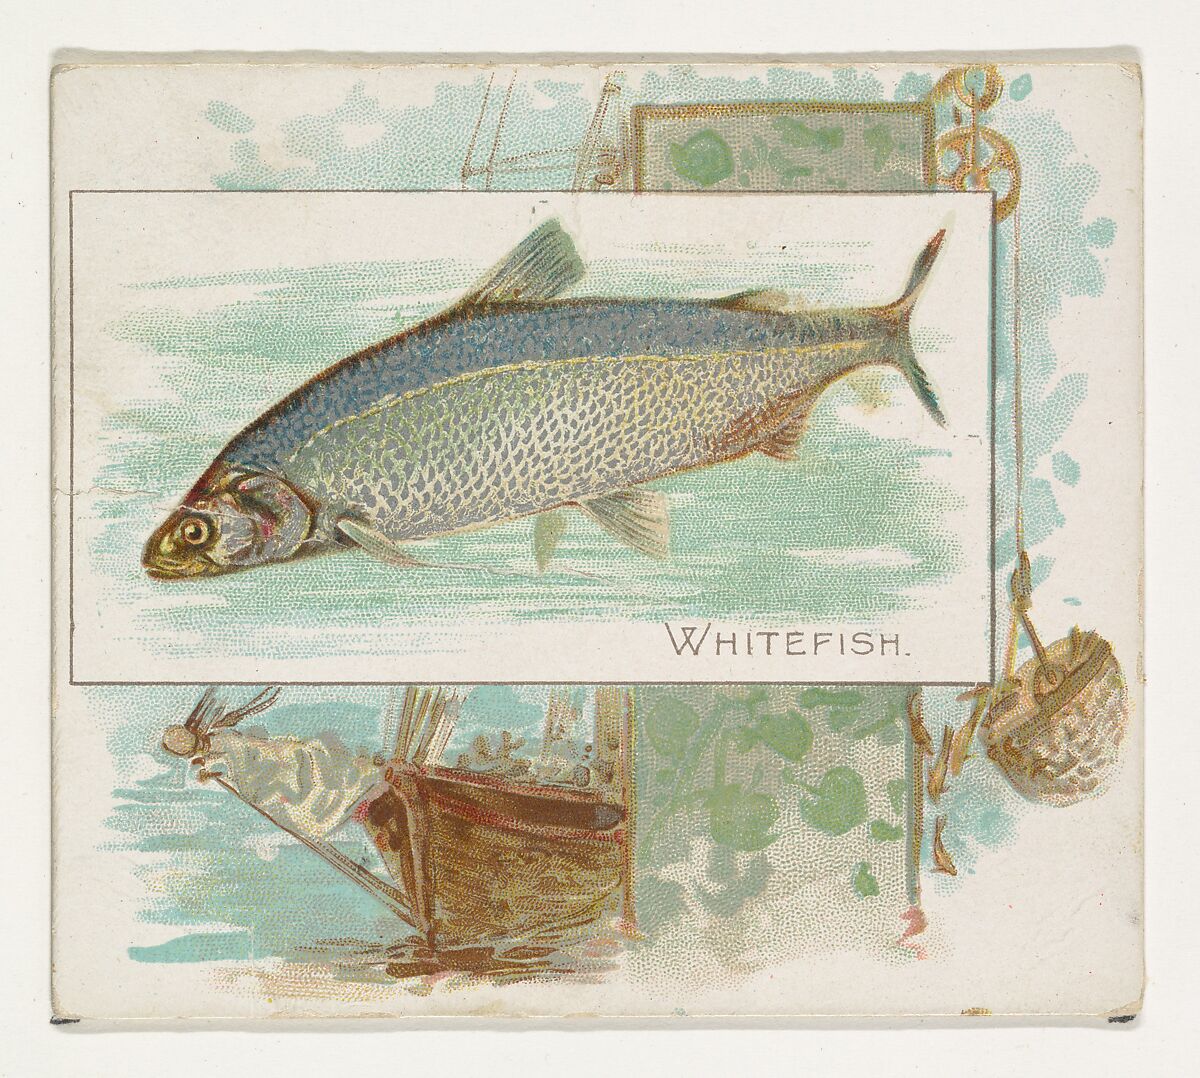 Whitefish, from Fish from American Waters series (N39) for Allen & Ginter Cigarettes, Issued by Allen &amp; Ginter (American, Richmond, Virginia), Commercial color lithograph 